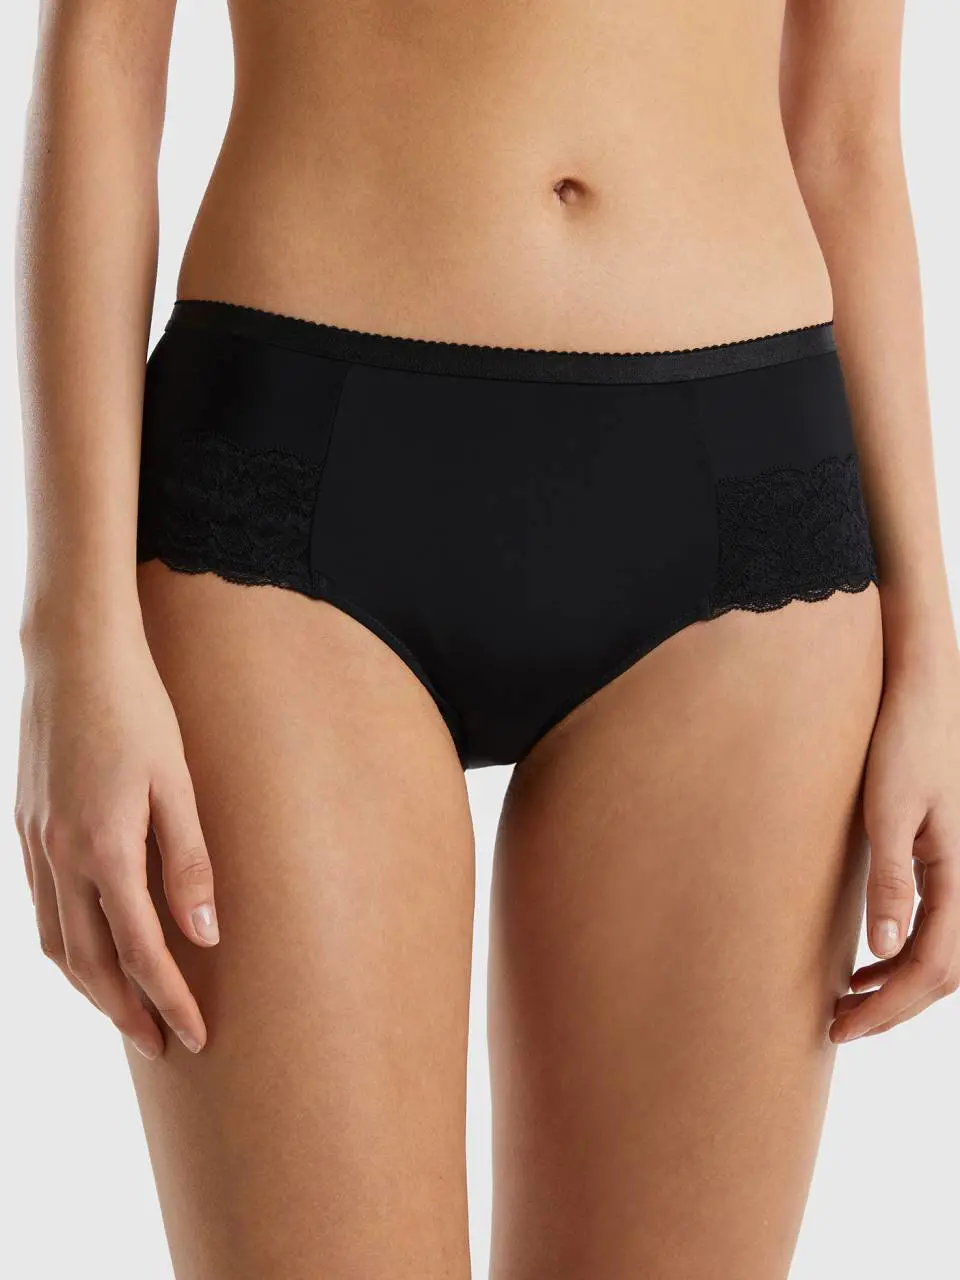 Benetton high-waisted culotte underwear with lace. 1